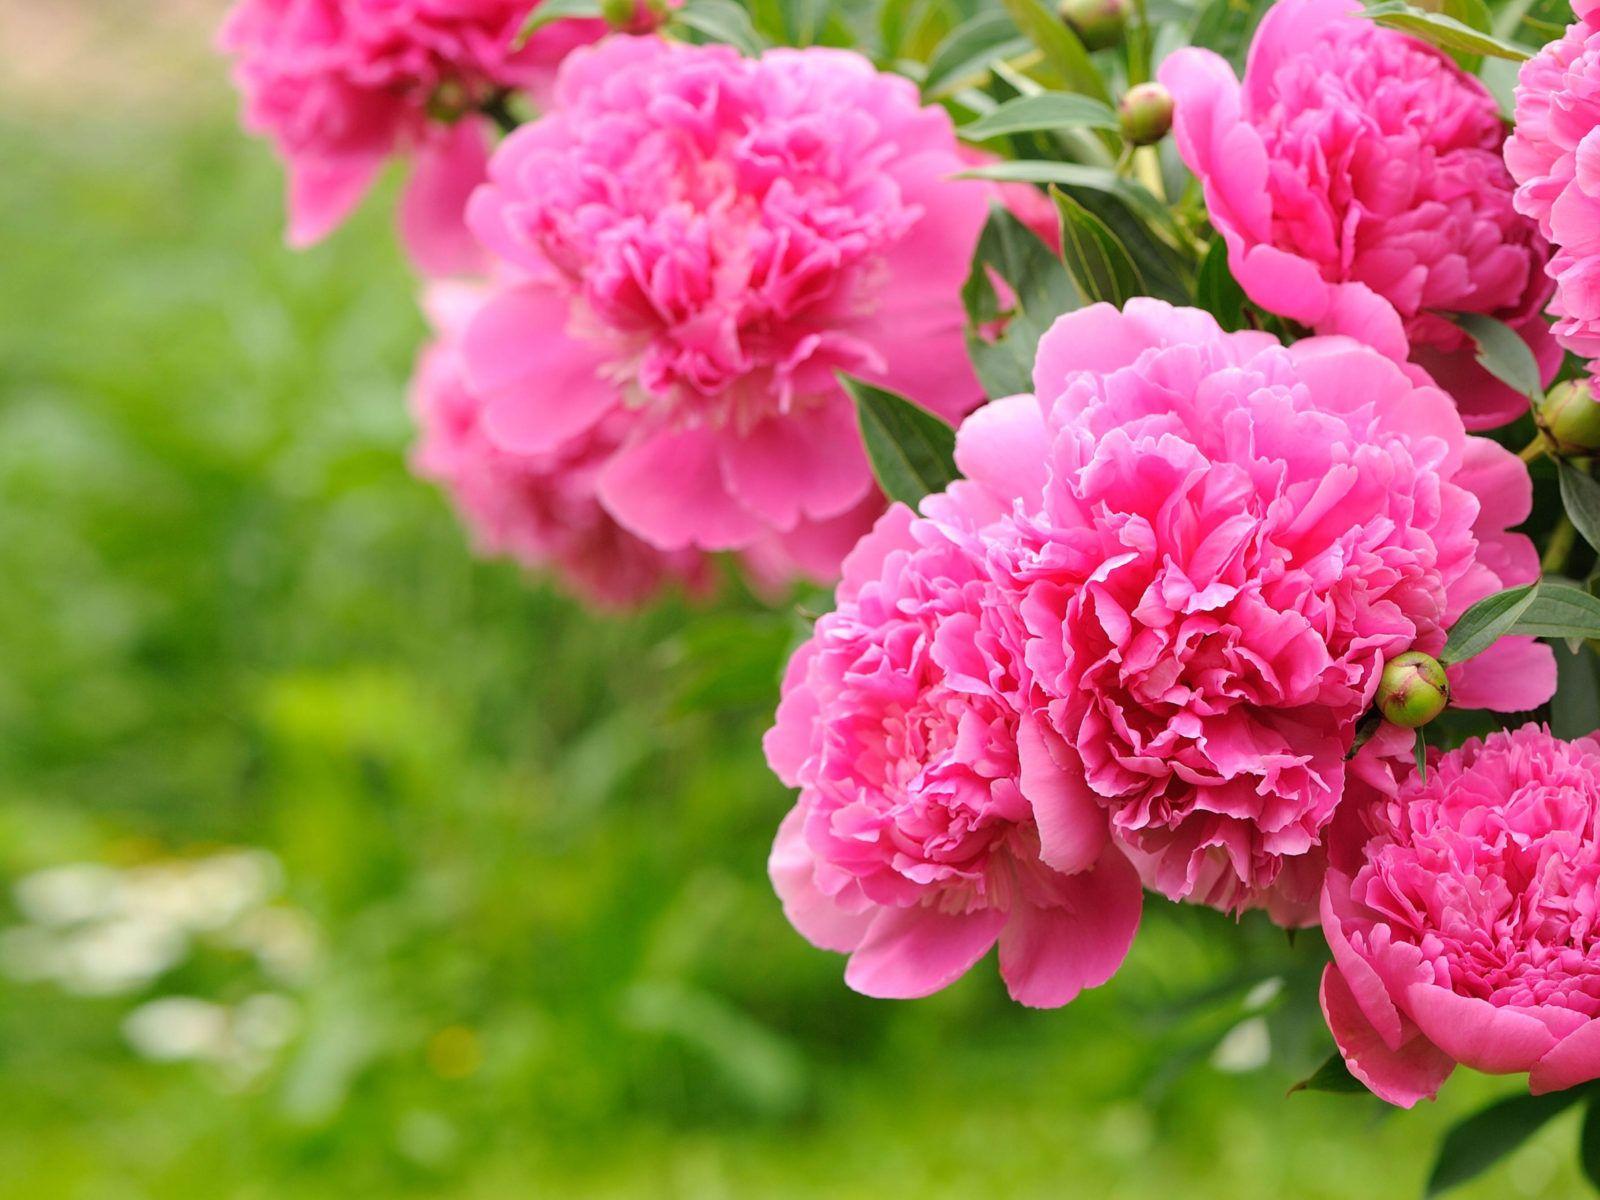 Pink and Green Flowers Wallpapers - Top Free Pink and Green Flowers